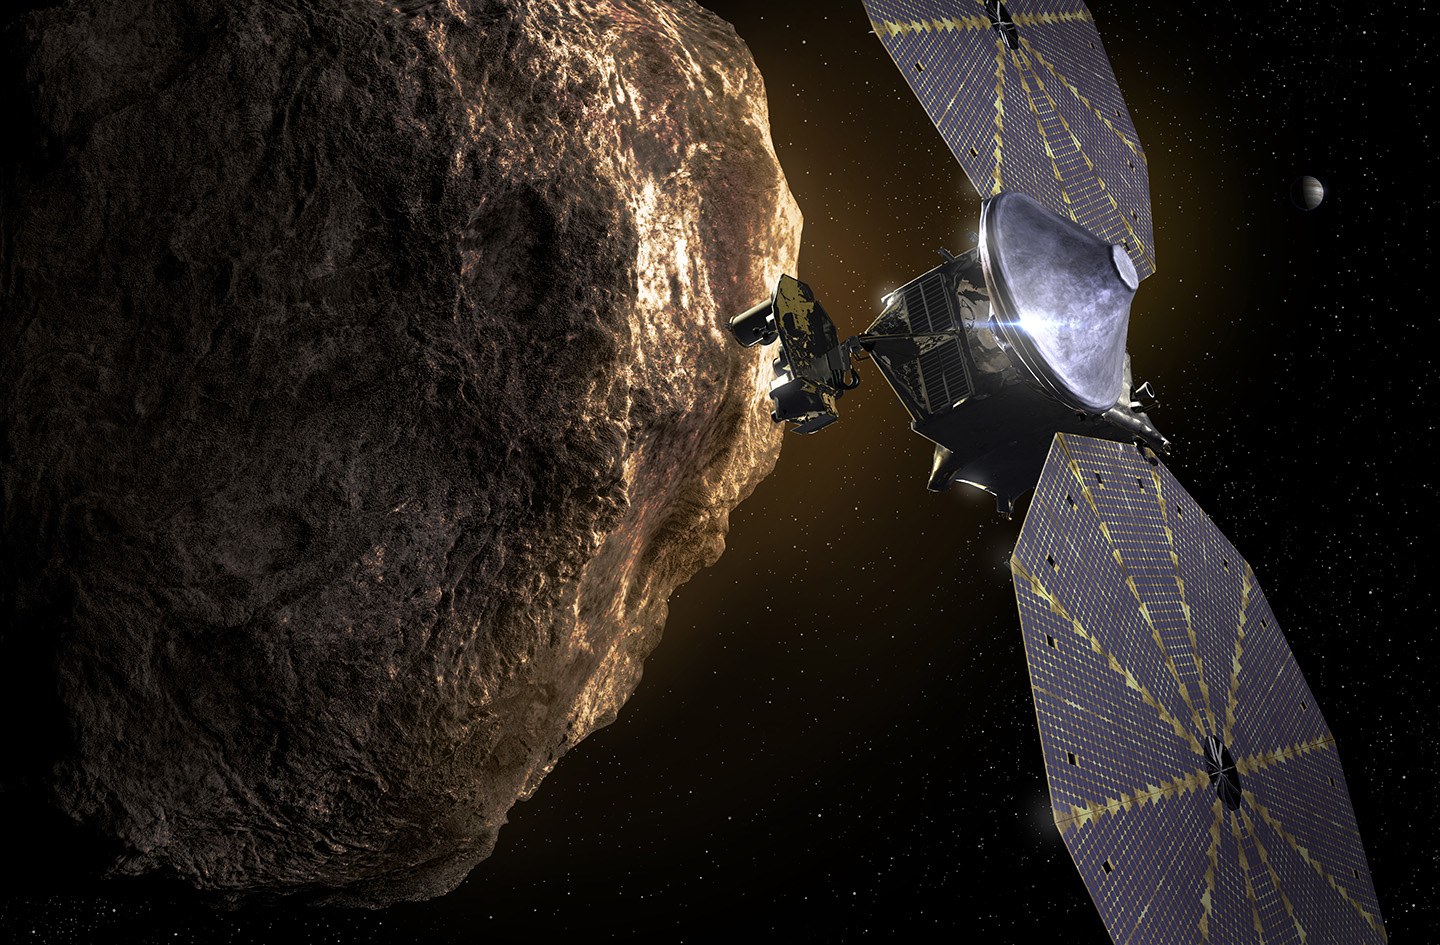 NASA's Lucy spacecraft at the Trojan asteroids